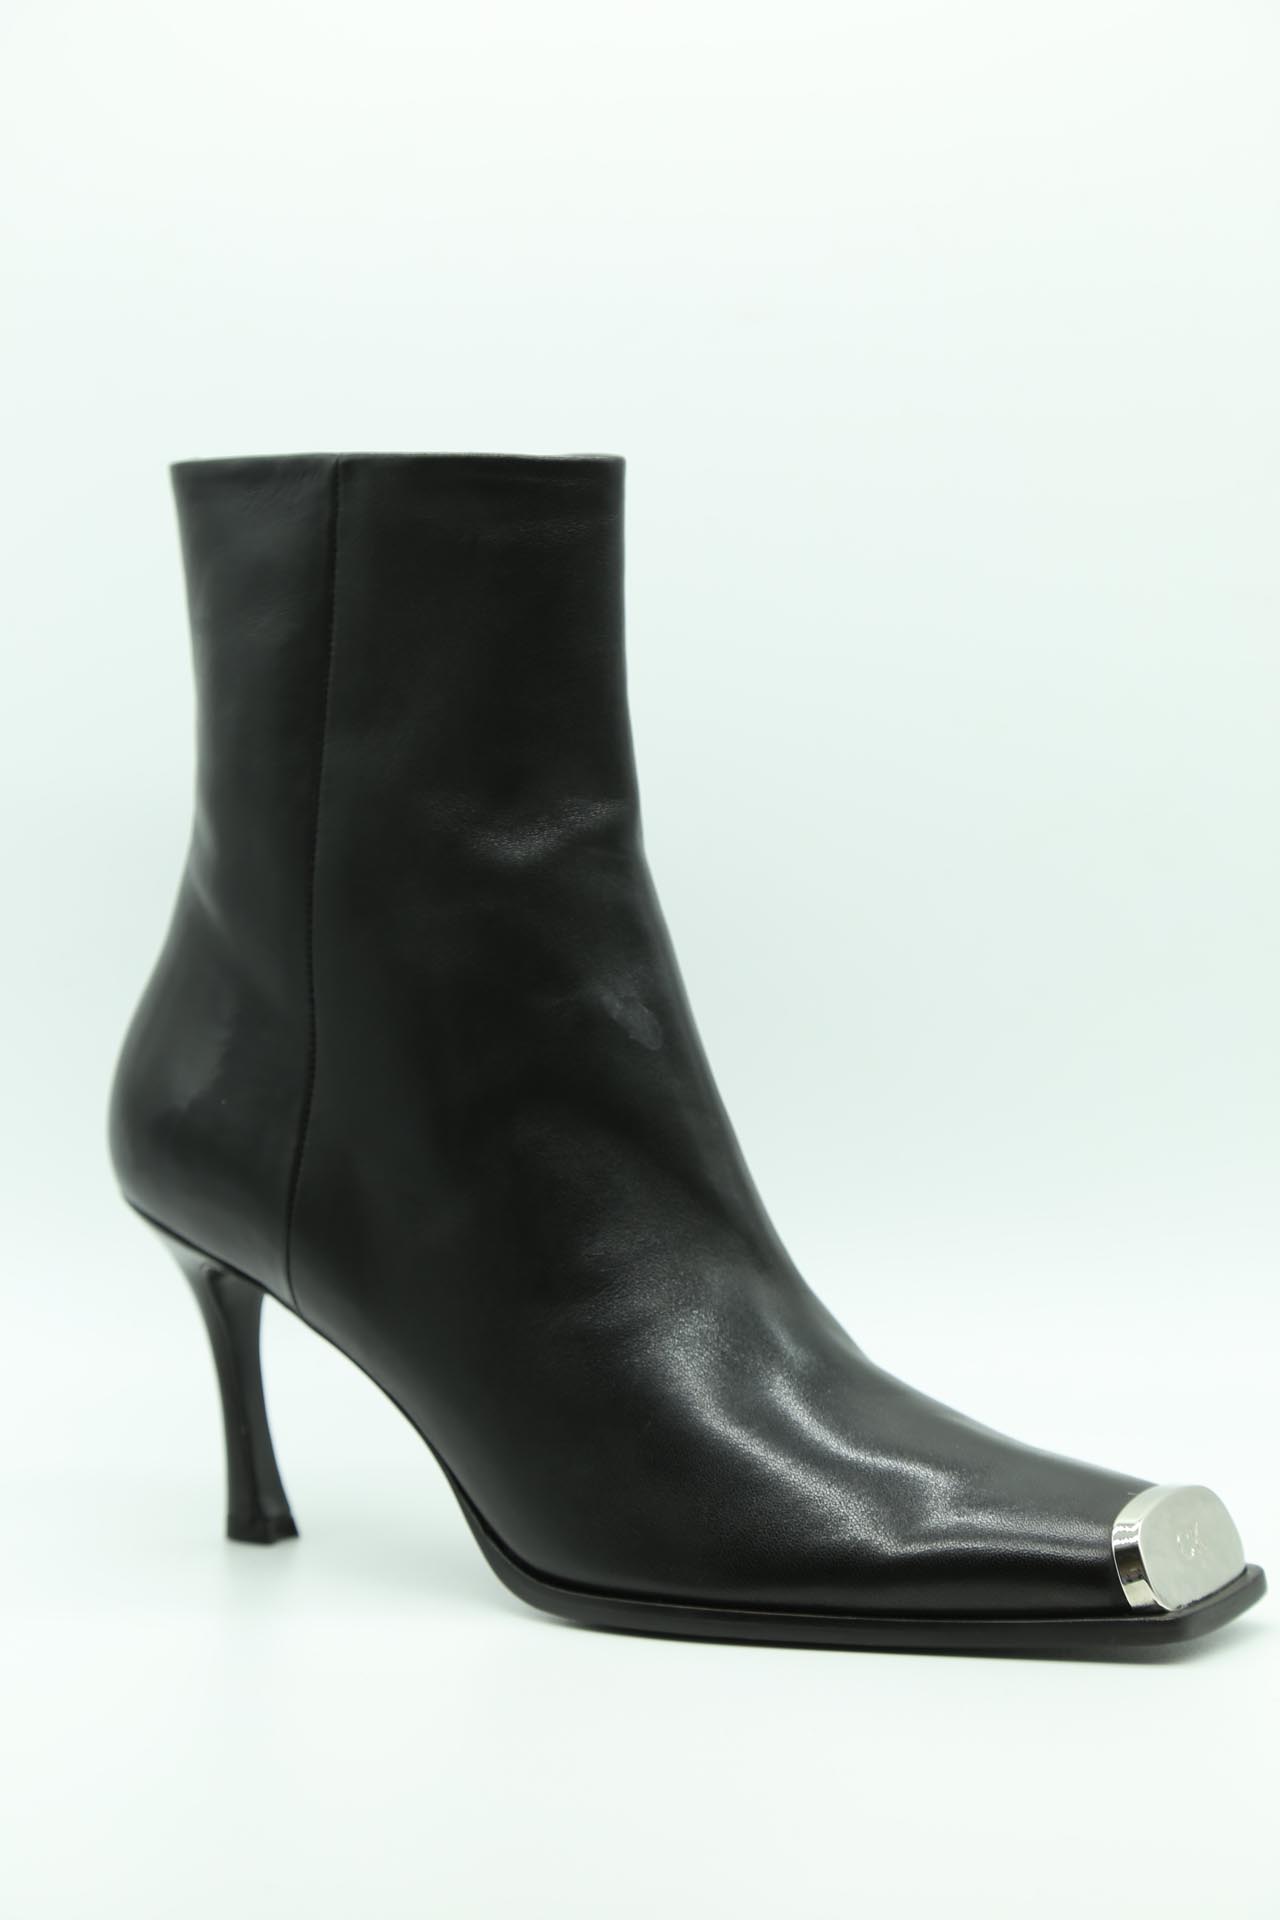 Calvin Klein, Ankle Boots